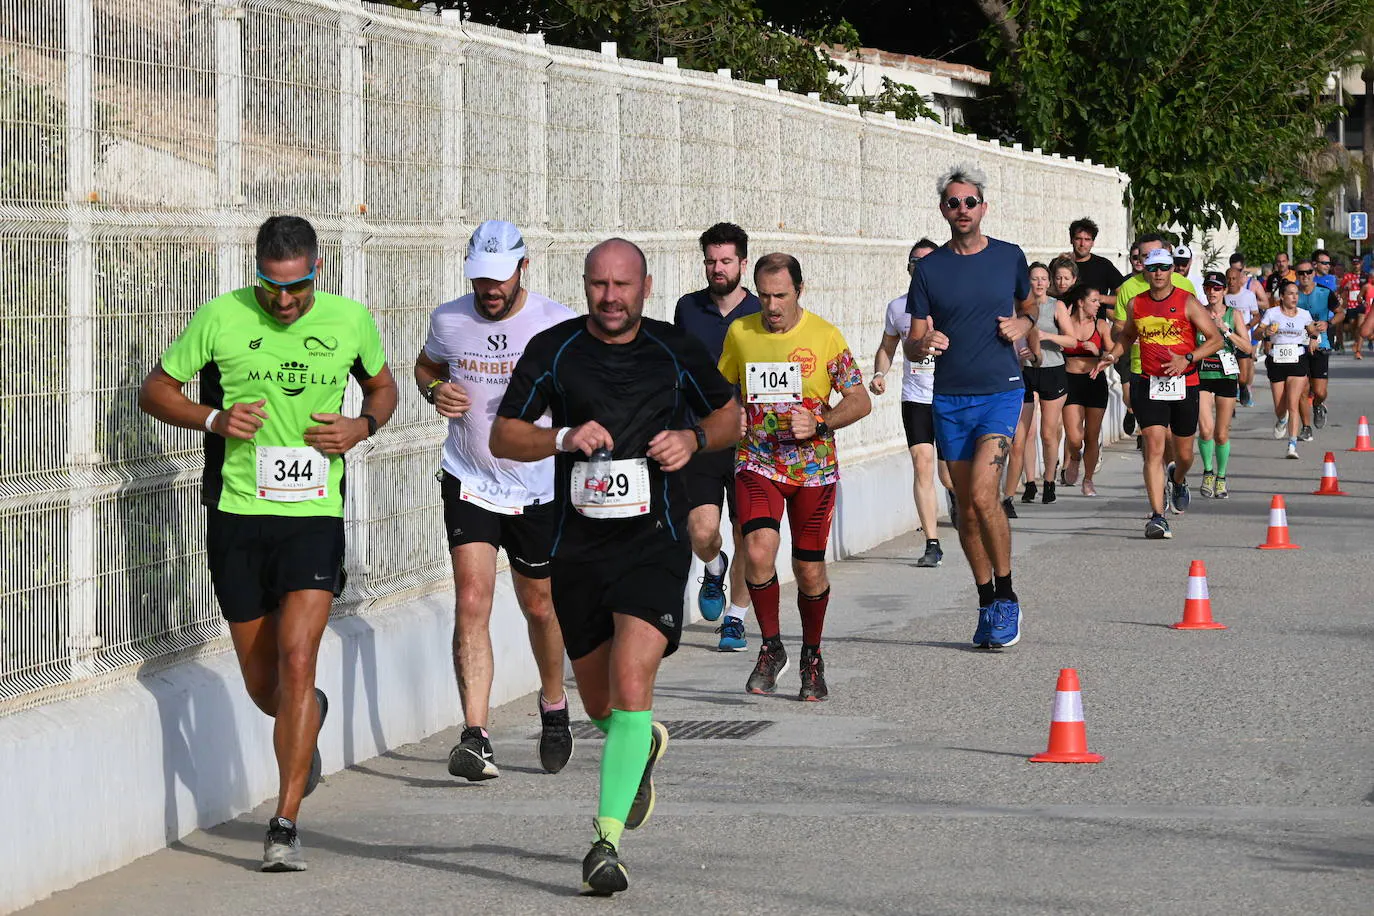 Some 655 people took part in the race, with five runners completing the event in under an hour and ten minutes.